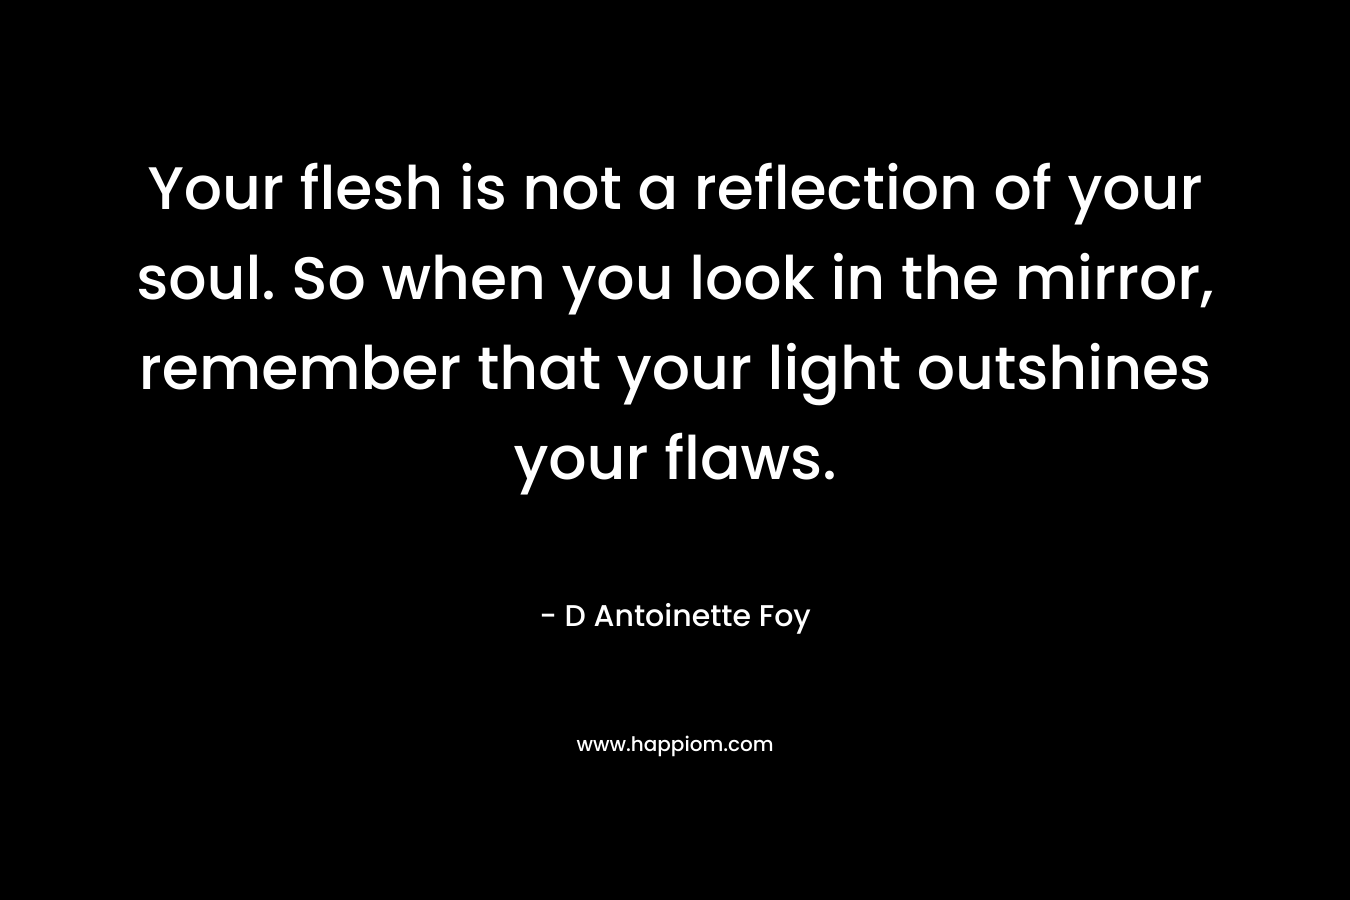 Your flesh is not a reflection of your soul. So when you look in the mirror, remember that your light outshines your flaws.